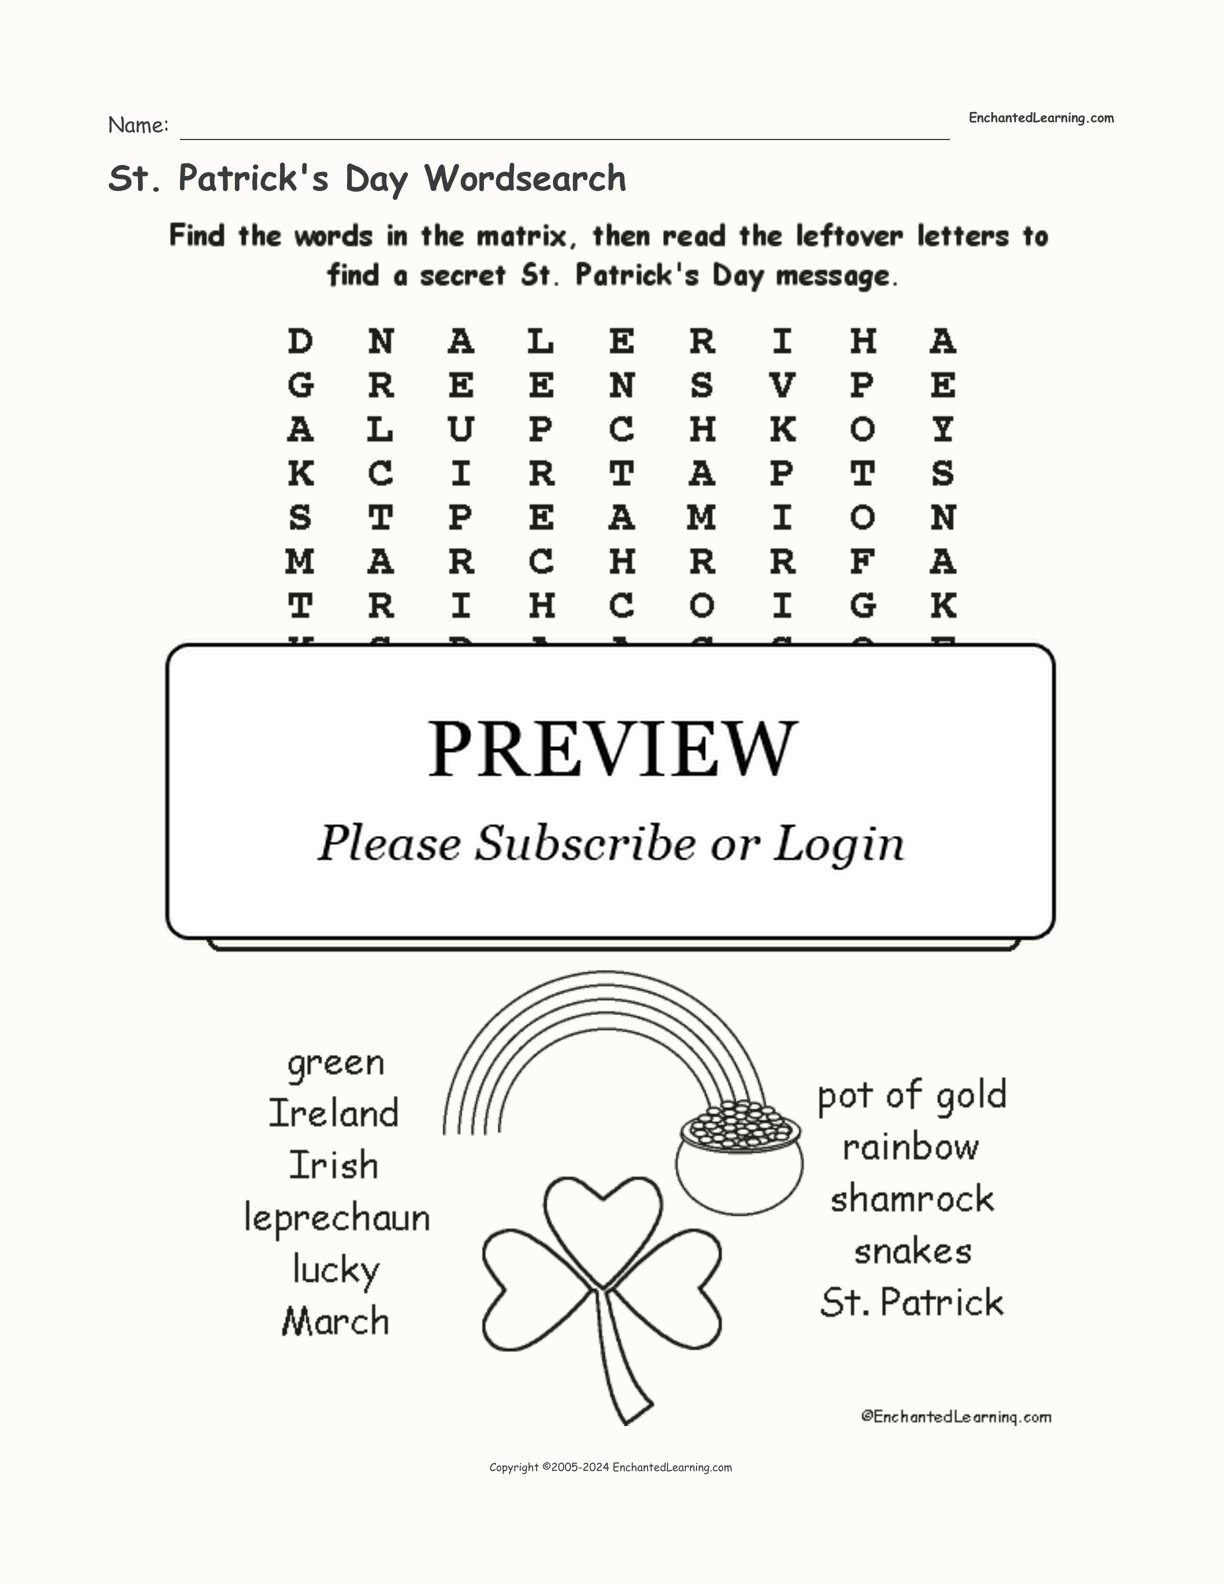 St. Patrick's Day Wordsearch interactive worksheet page 1